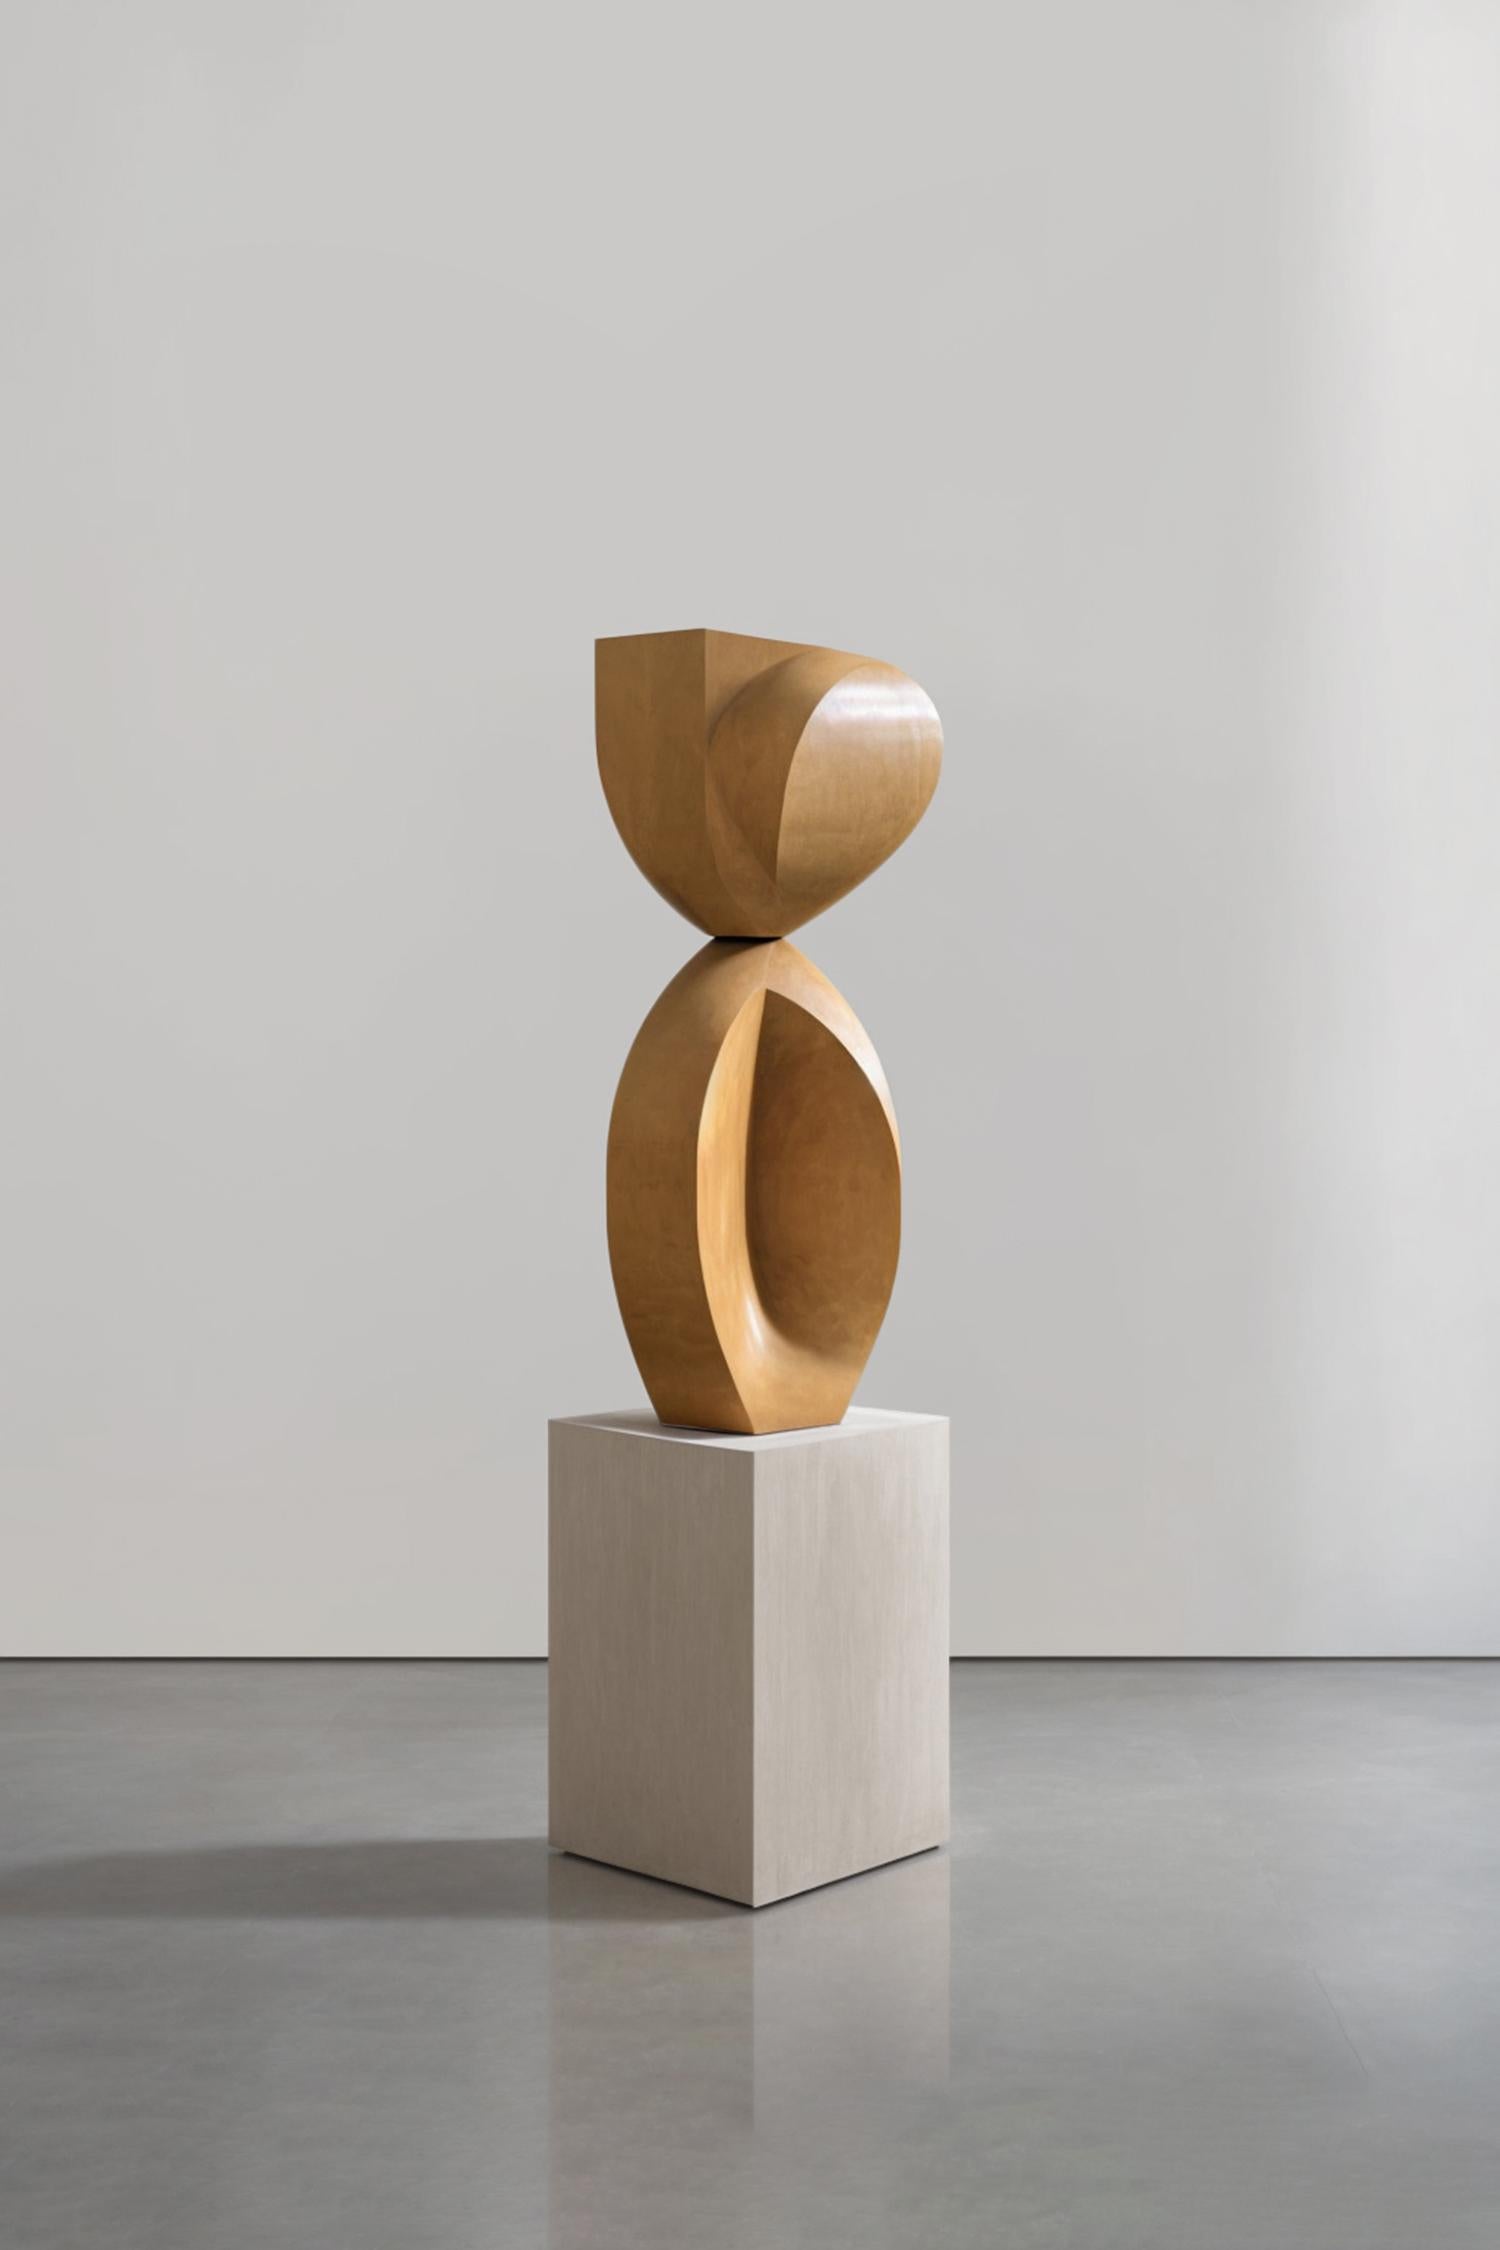 Abstract wood sculpture in the Flair of Scandinavian Art, Unseen Force by Joel Escalona

This monolithic sculpture, designed by the talented Artist Joel Escalona, is a towering example of beauty in craftsmanship. Hand and digital machine made; the